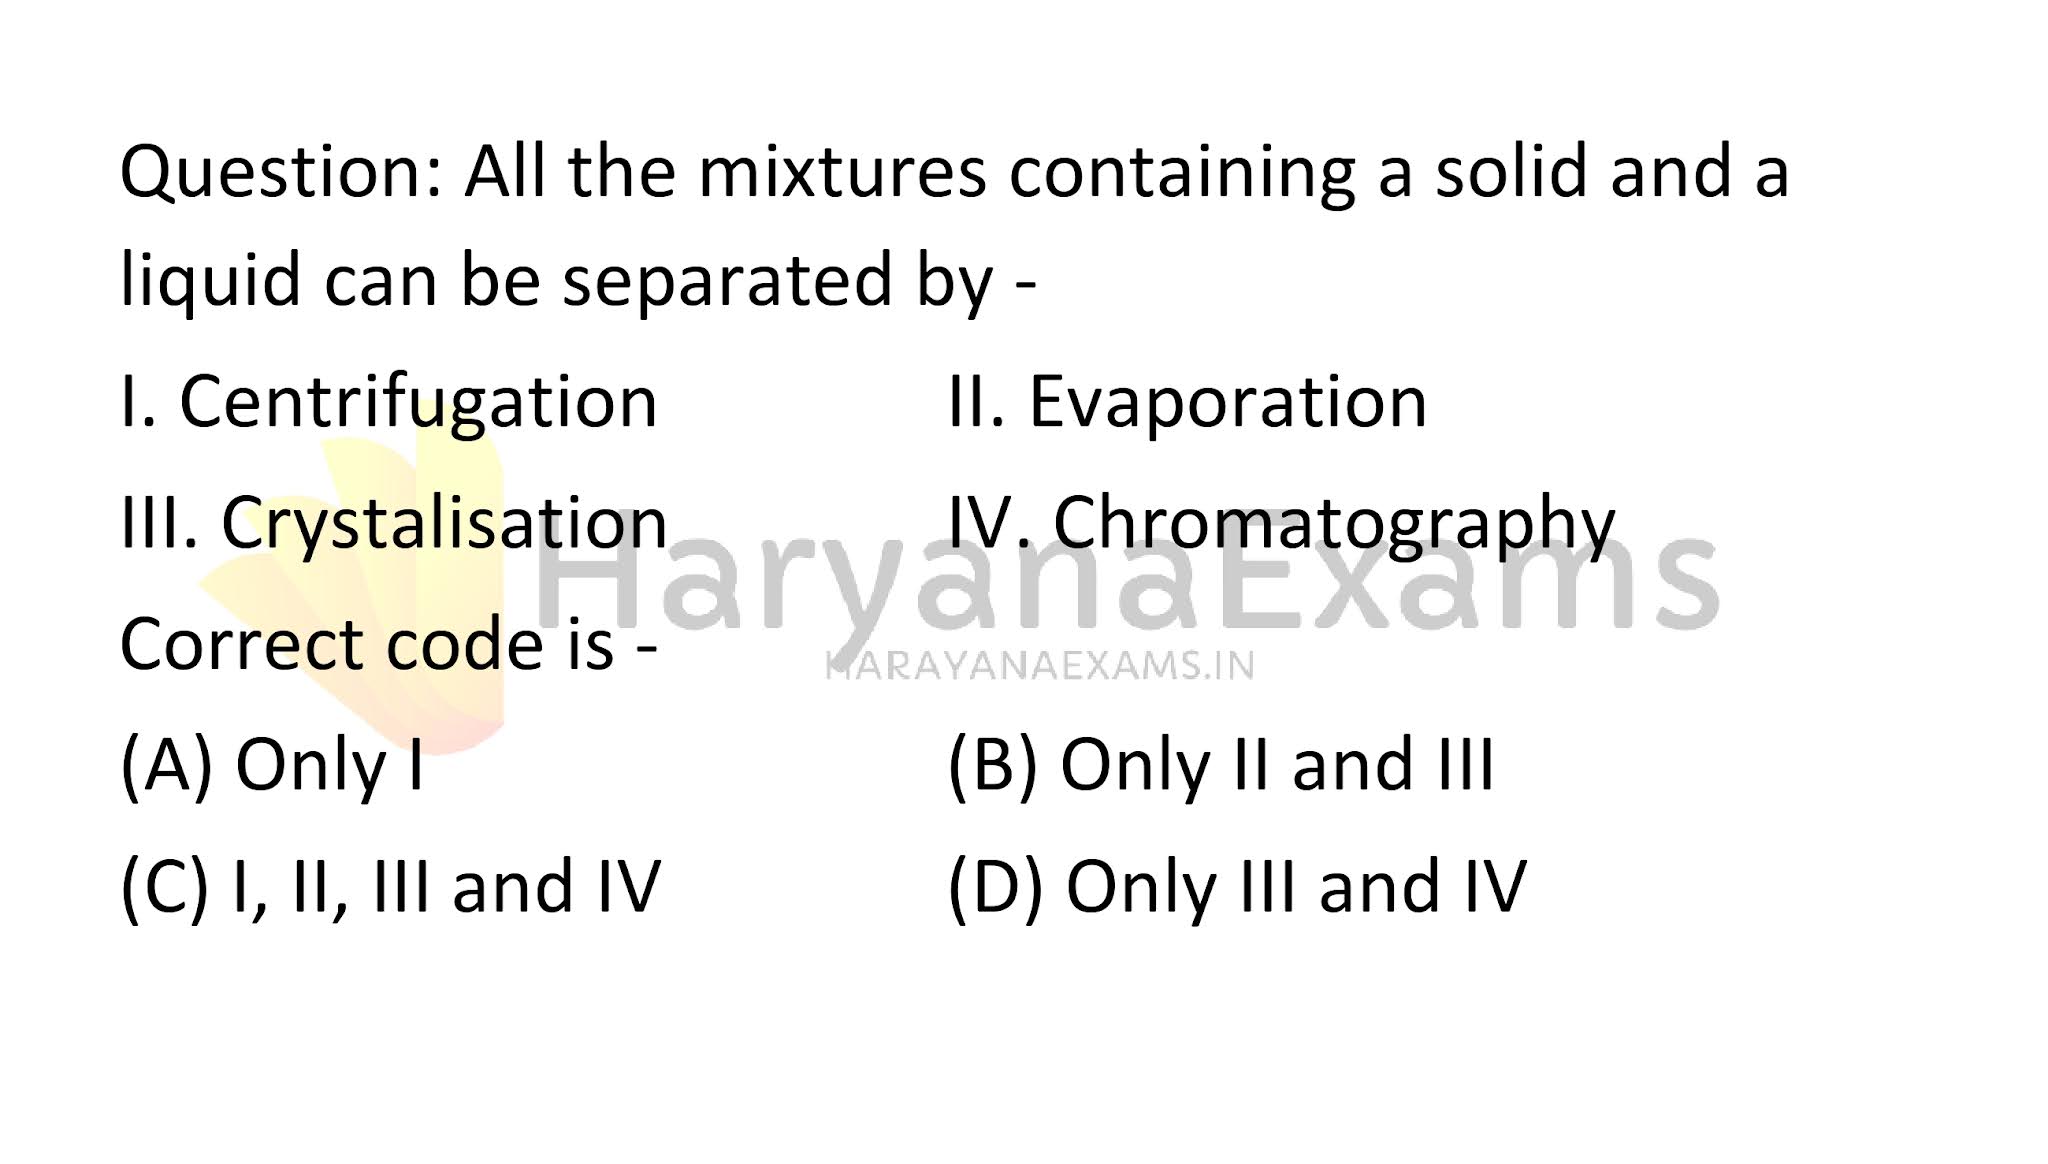 All the mixtures containing a solid and a liquid can be separated by -